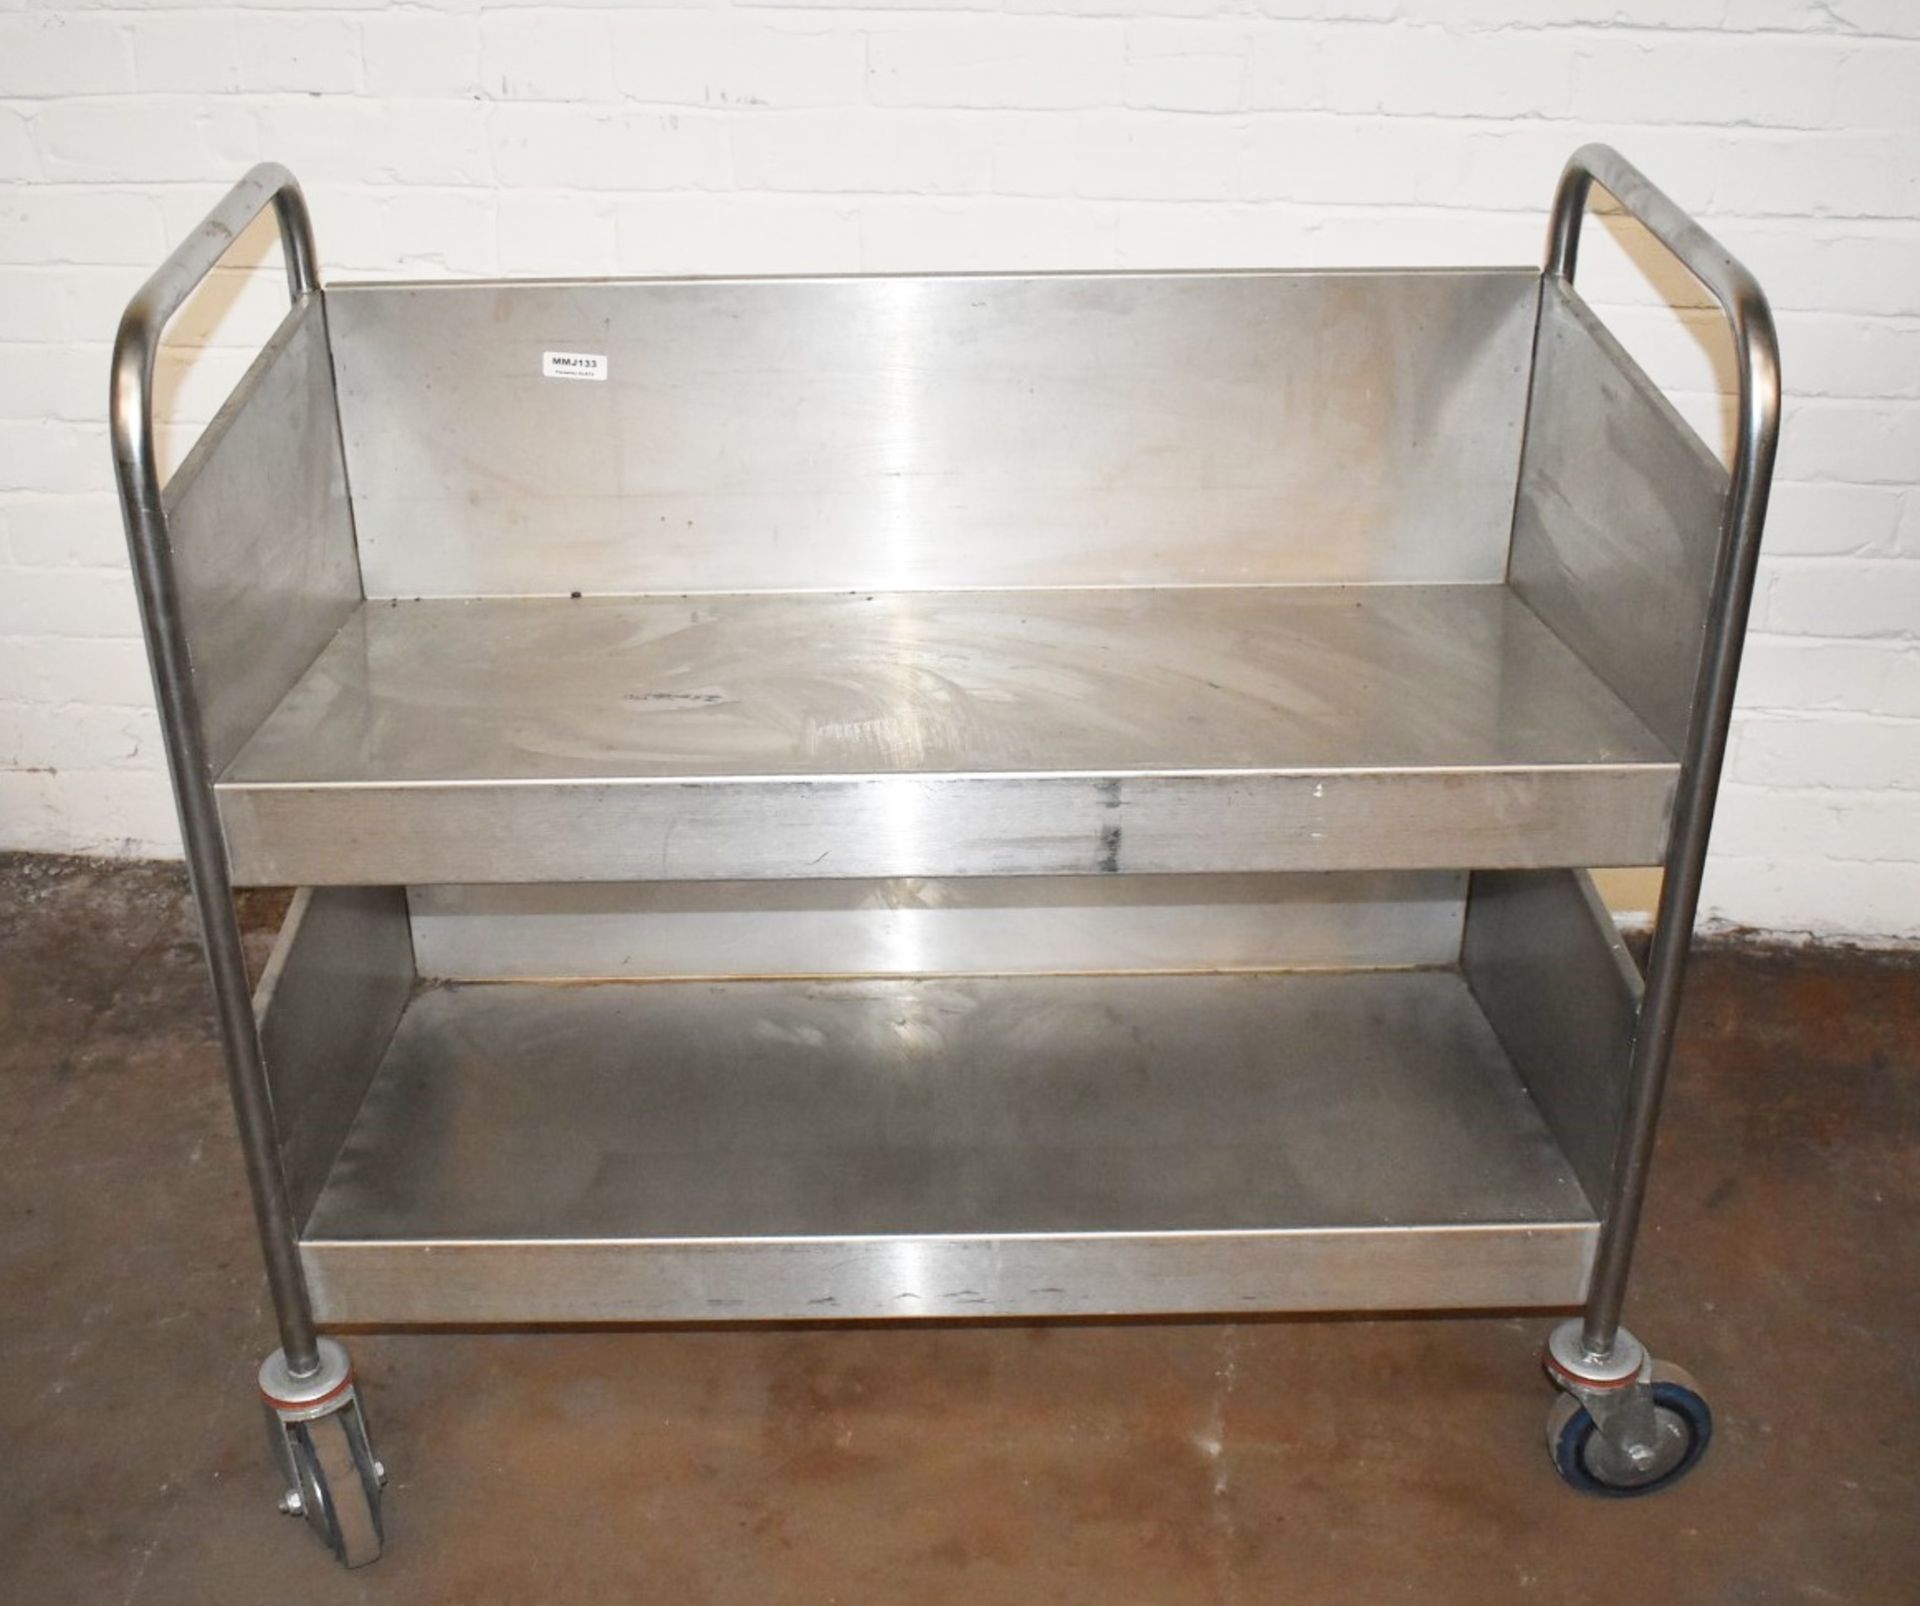 1 x Stainless Steel Trolley With Slanting Shelves and Heavy Duty Castors - Dimensions: H98 x W103 - Image 4 of 6